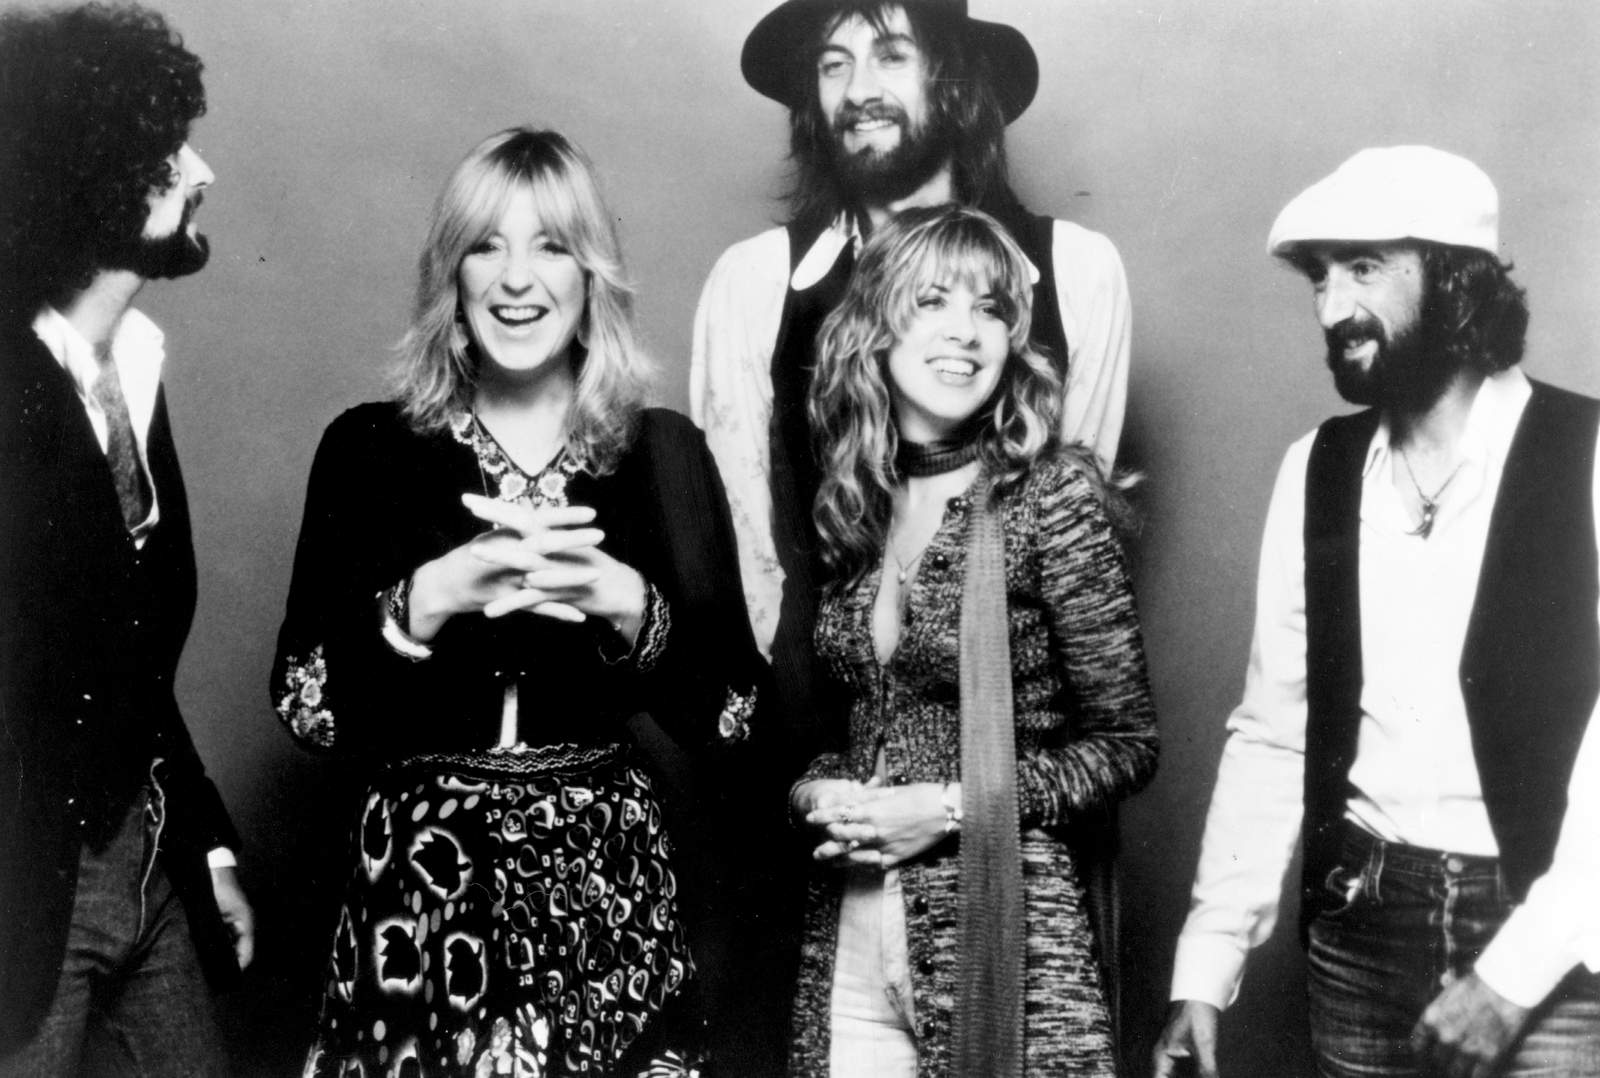 Fleetwood Mac’s ‘Dreams’ is gaining popularity, thanks to that hilarious now-viral TikTok